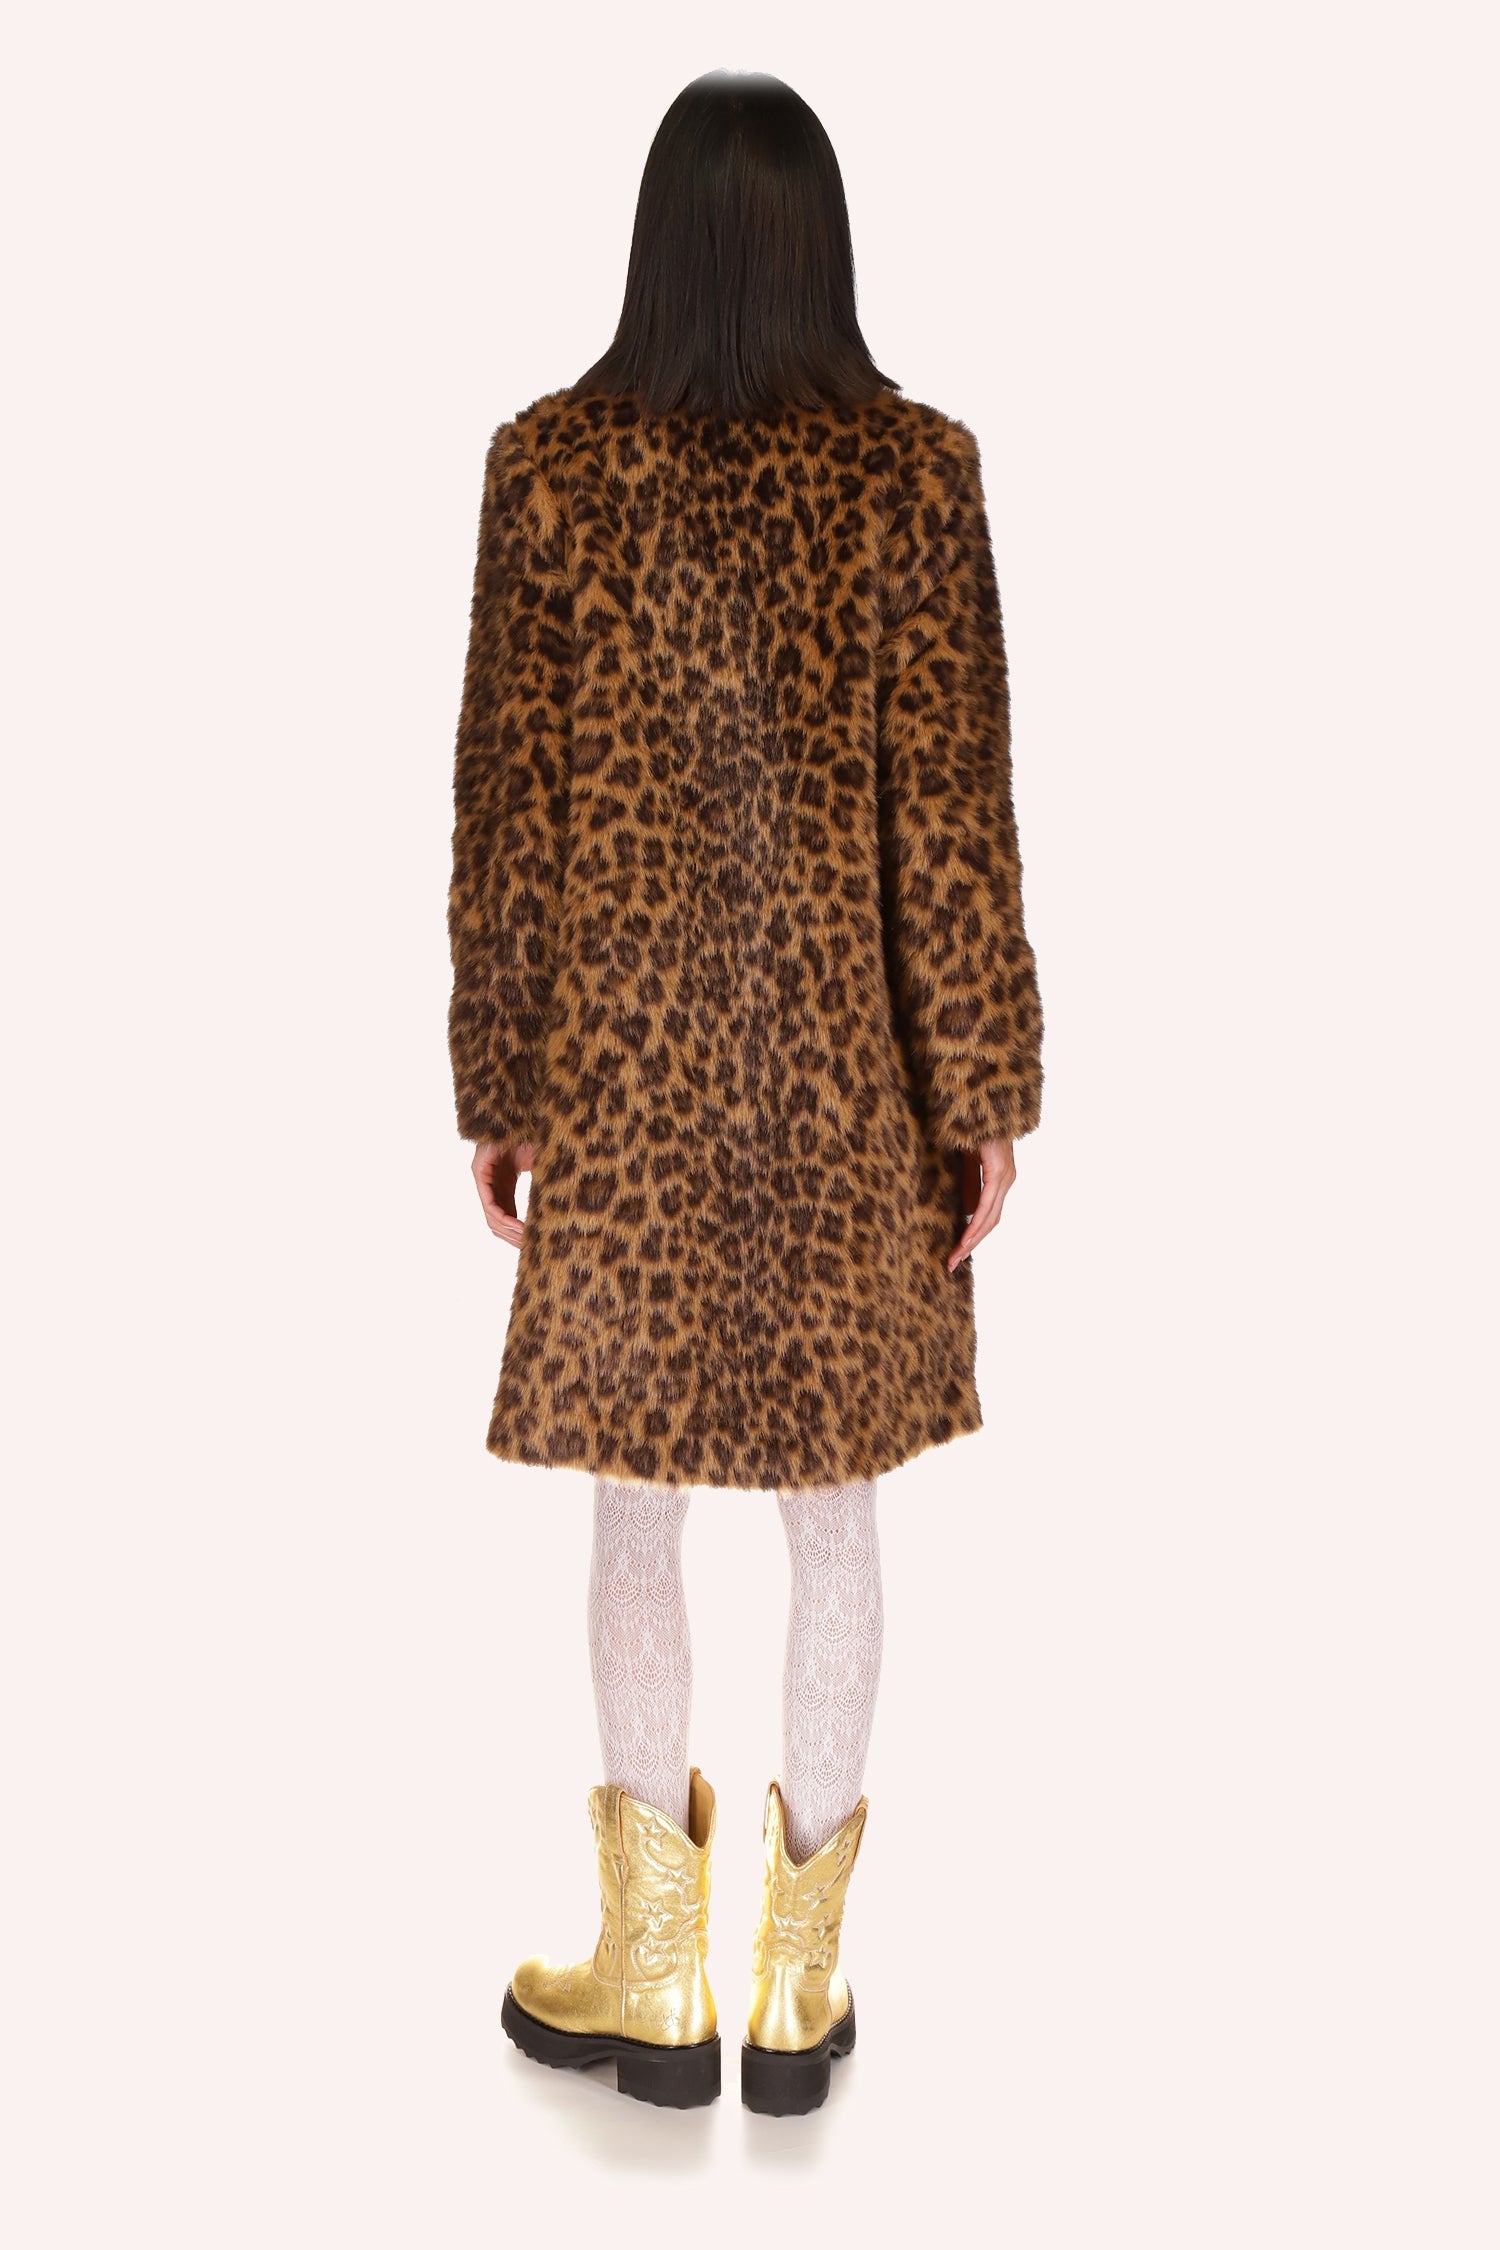 nna SuiThe Anna Sui Leopard Double Breasted Coat, stylish, durable coat that is perfect for adding some animal print to your outfits